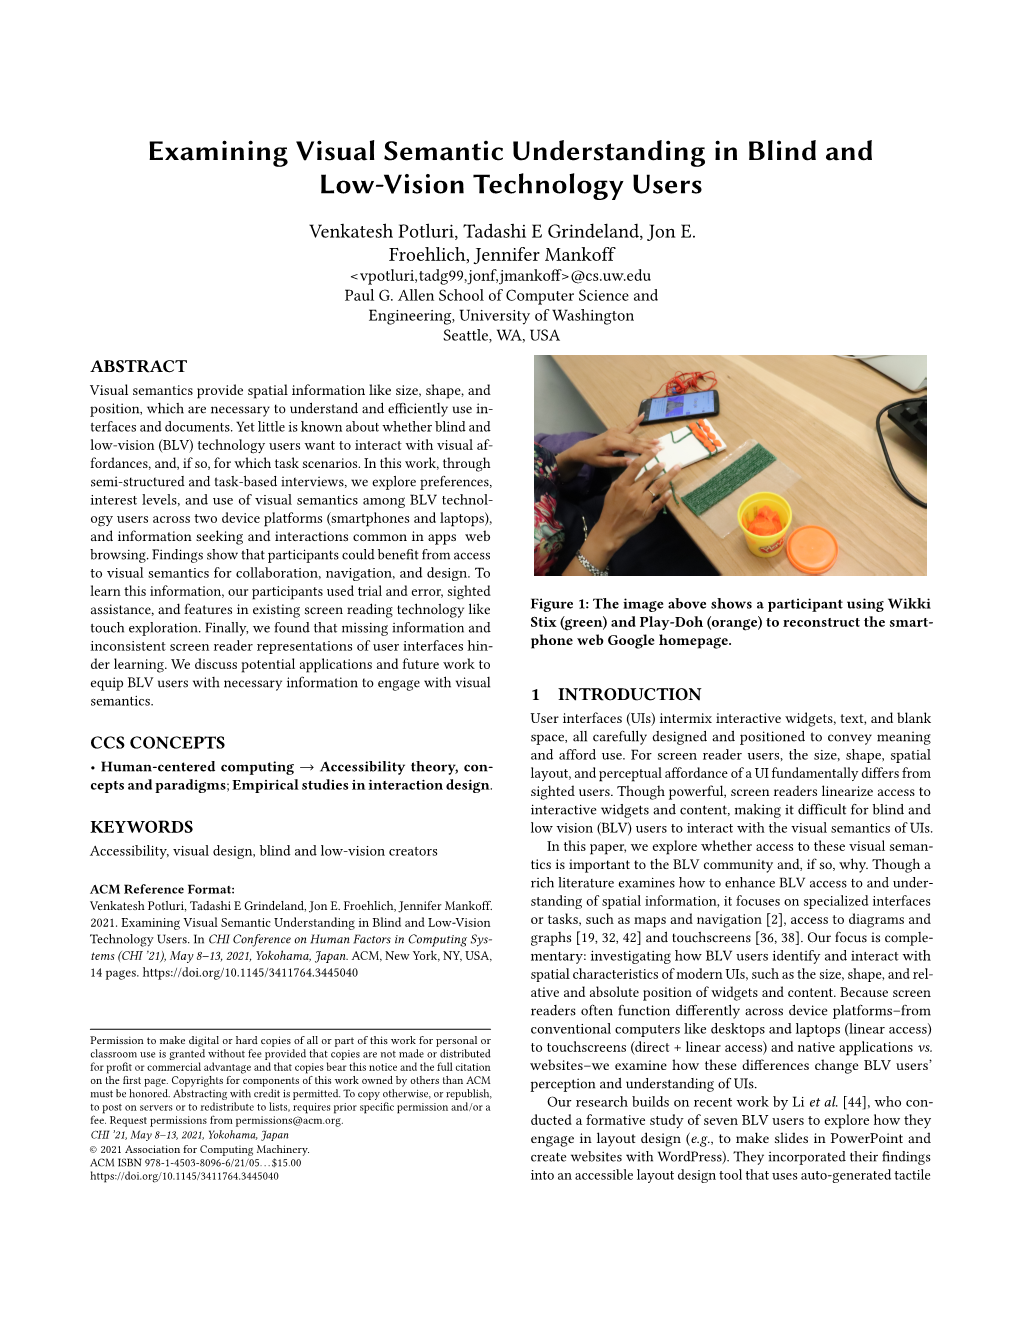 Examining Visual Semantic Understanding in Blind and Low-Vision Technology Users